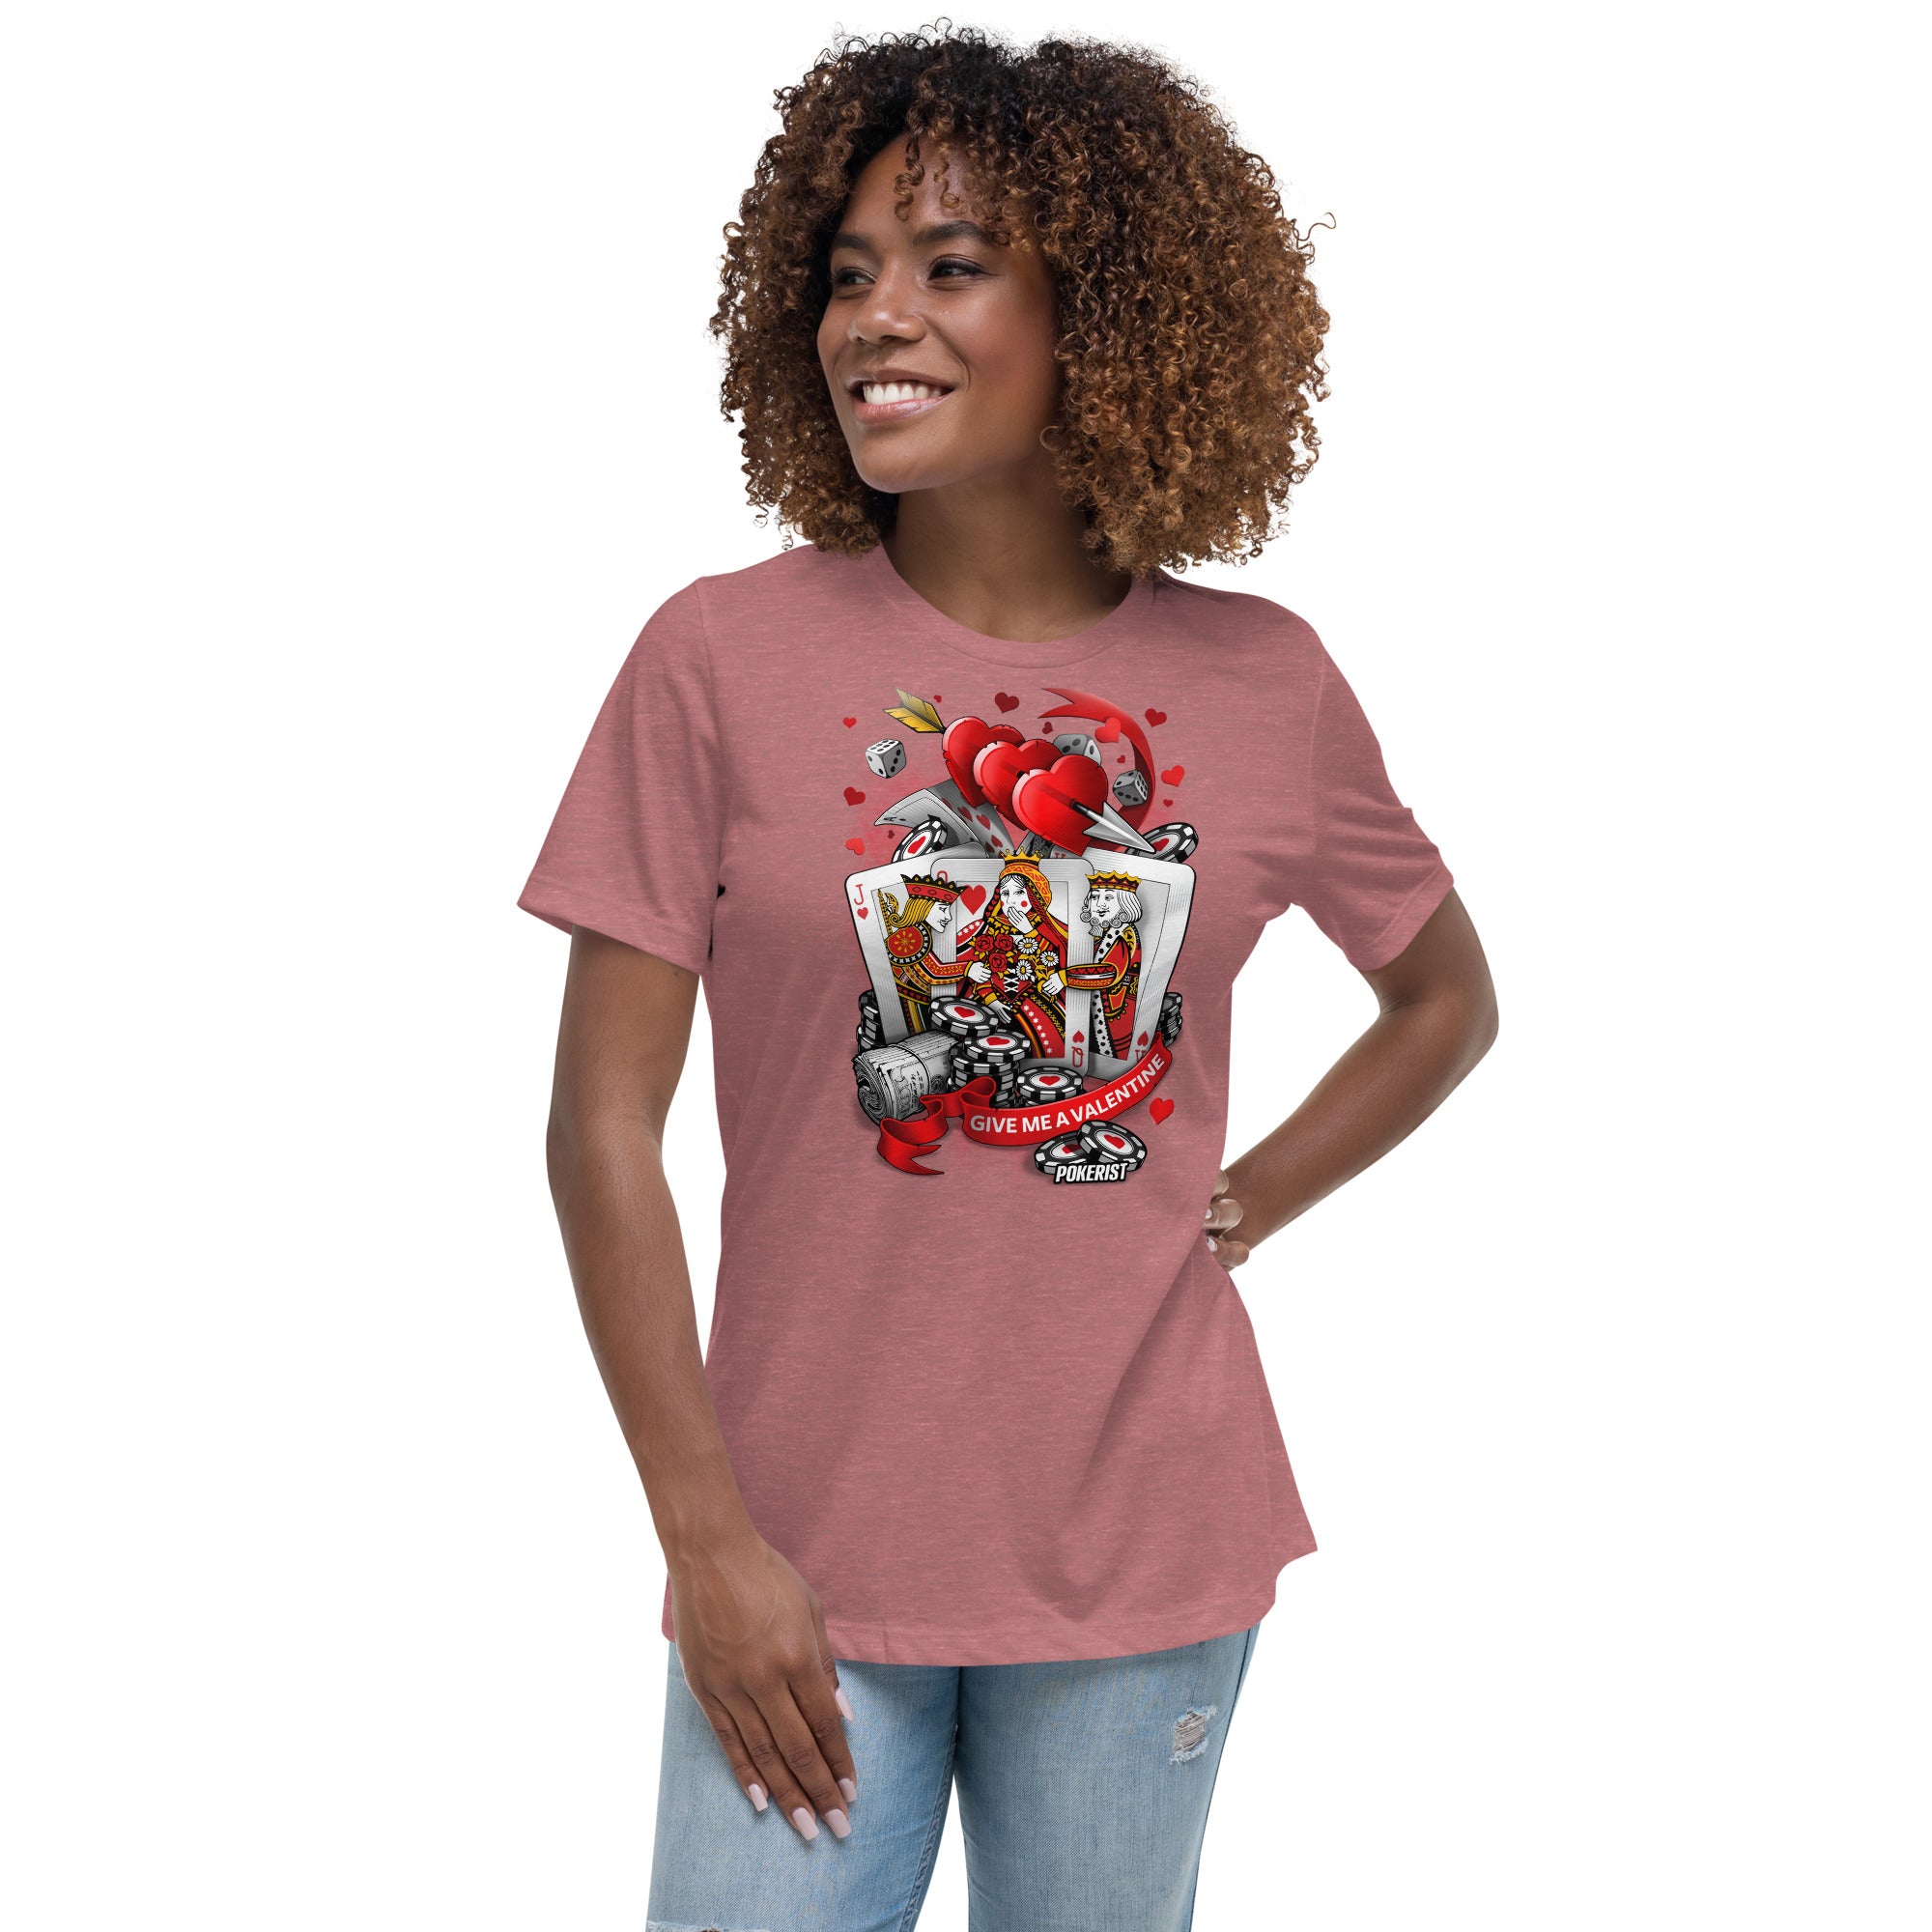 Give me a Valentine - Women's Relaxed T-Shirt